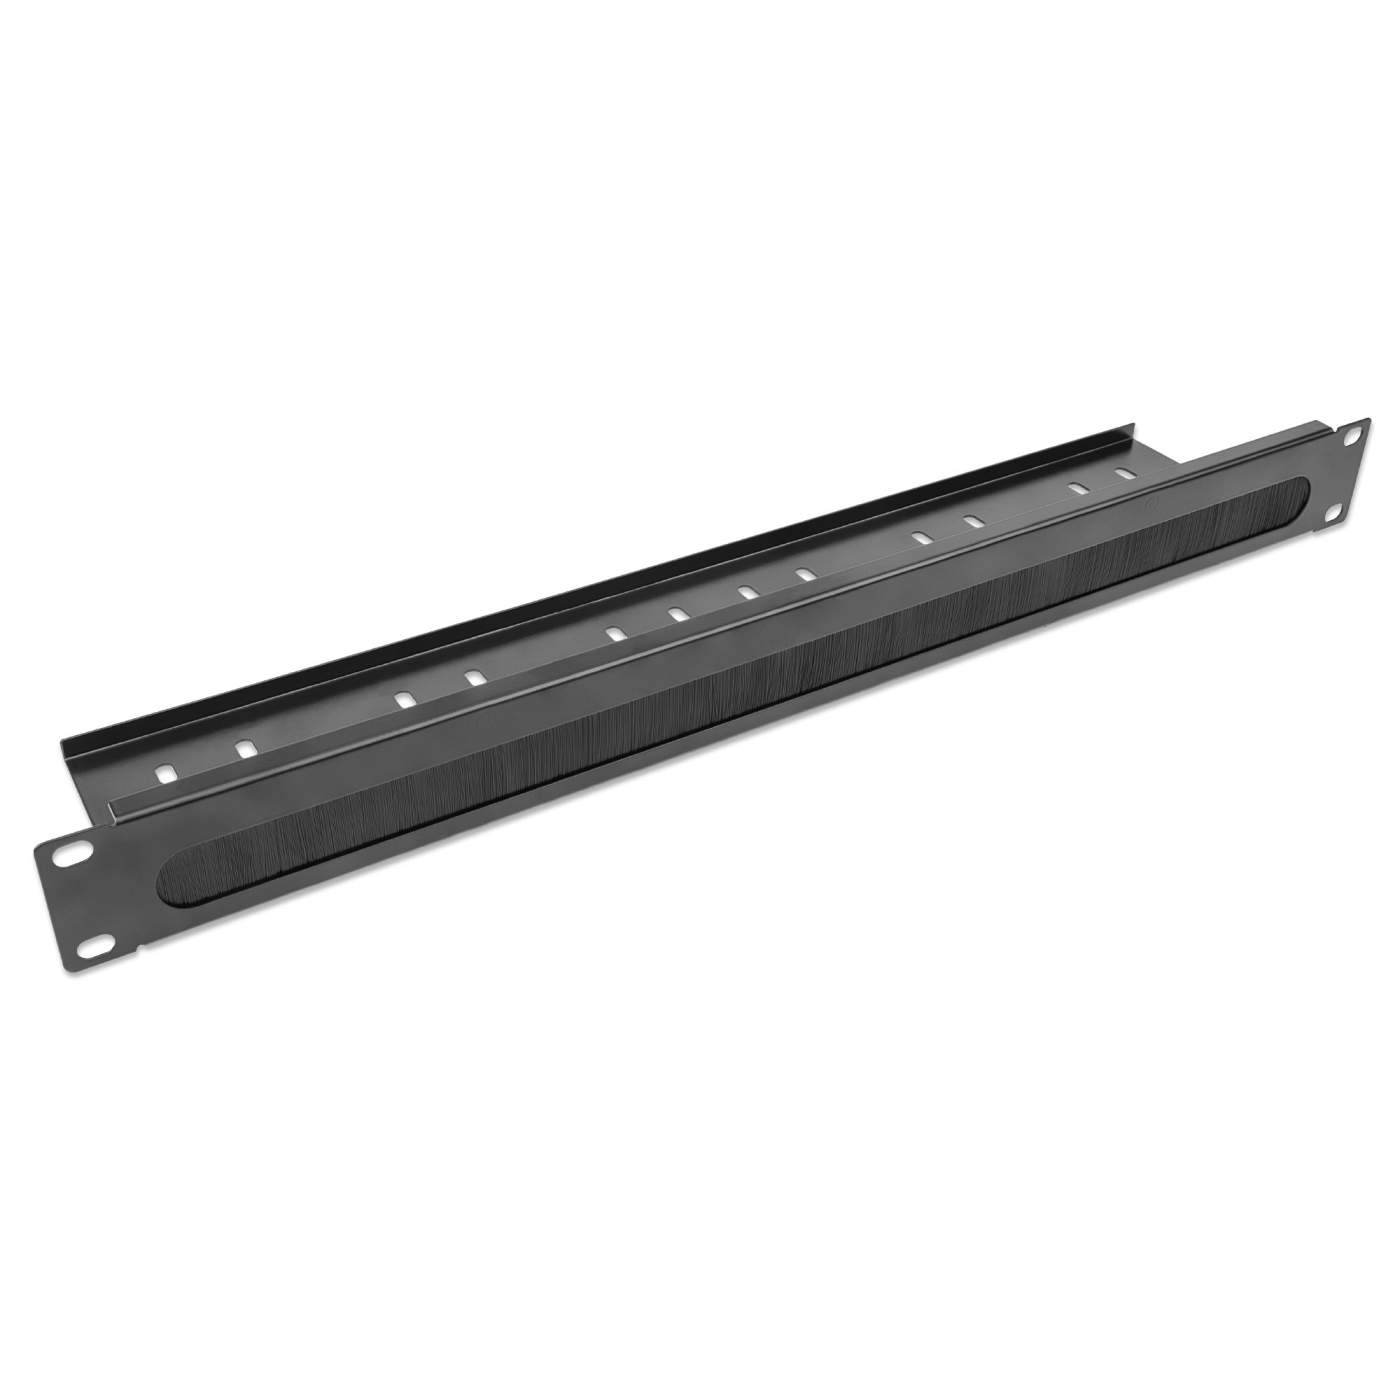 19" Cable Entry Panel with Cable Tray 2-Pack Image 2